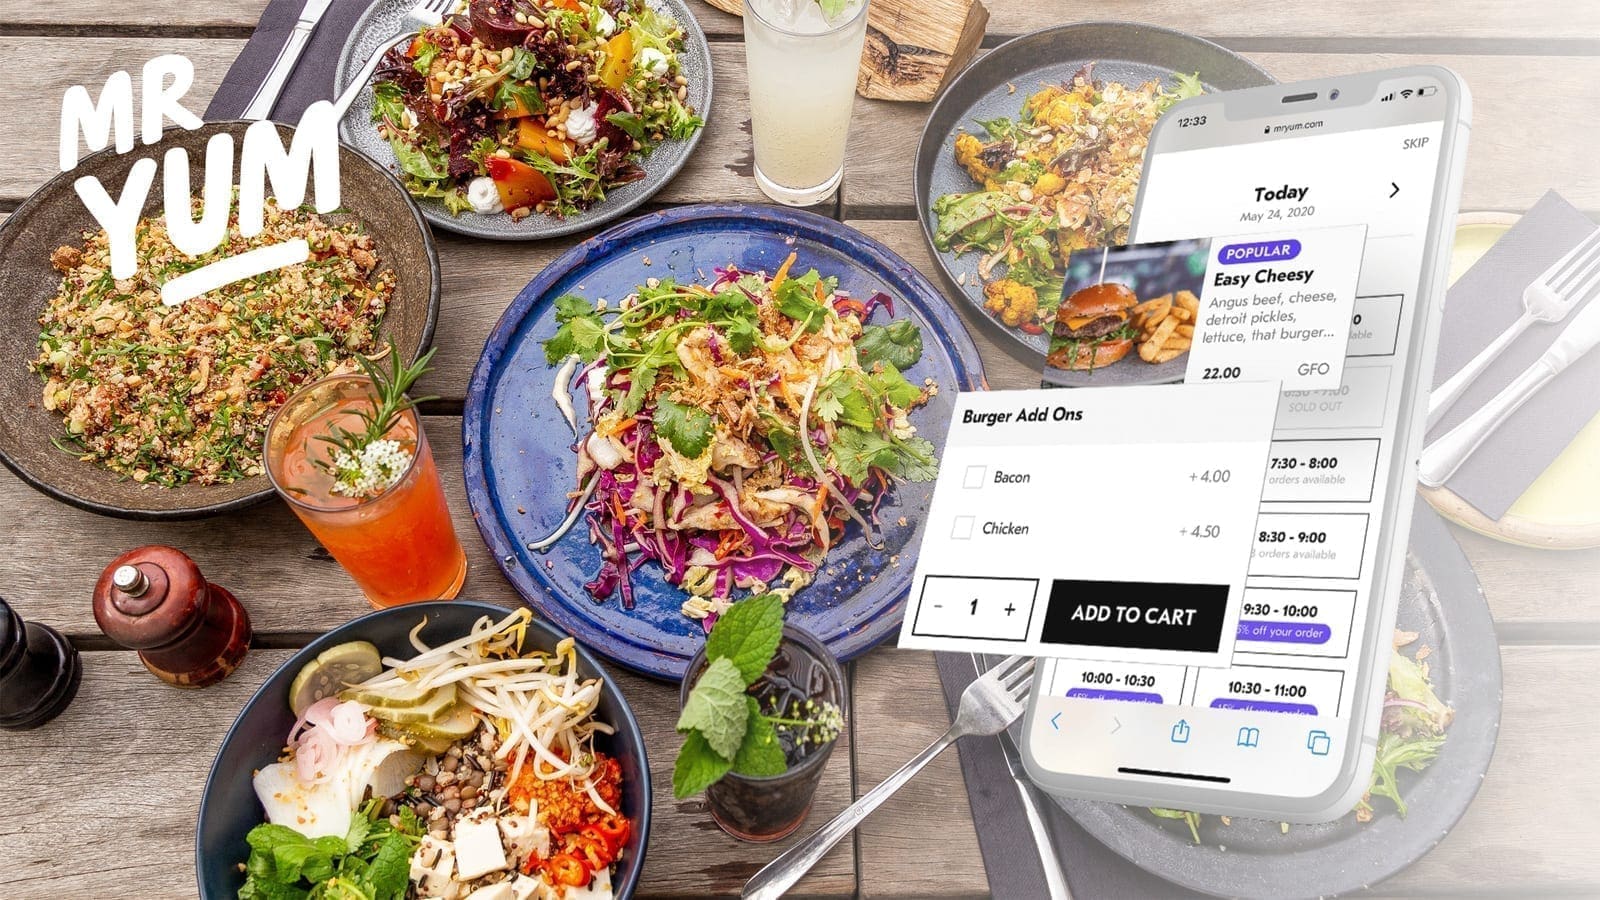 Mr Yum digitizes meal menus in South Africa as McCain launches fully customized cookbooks